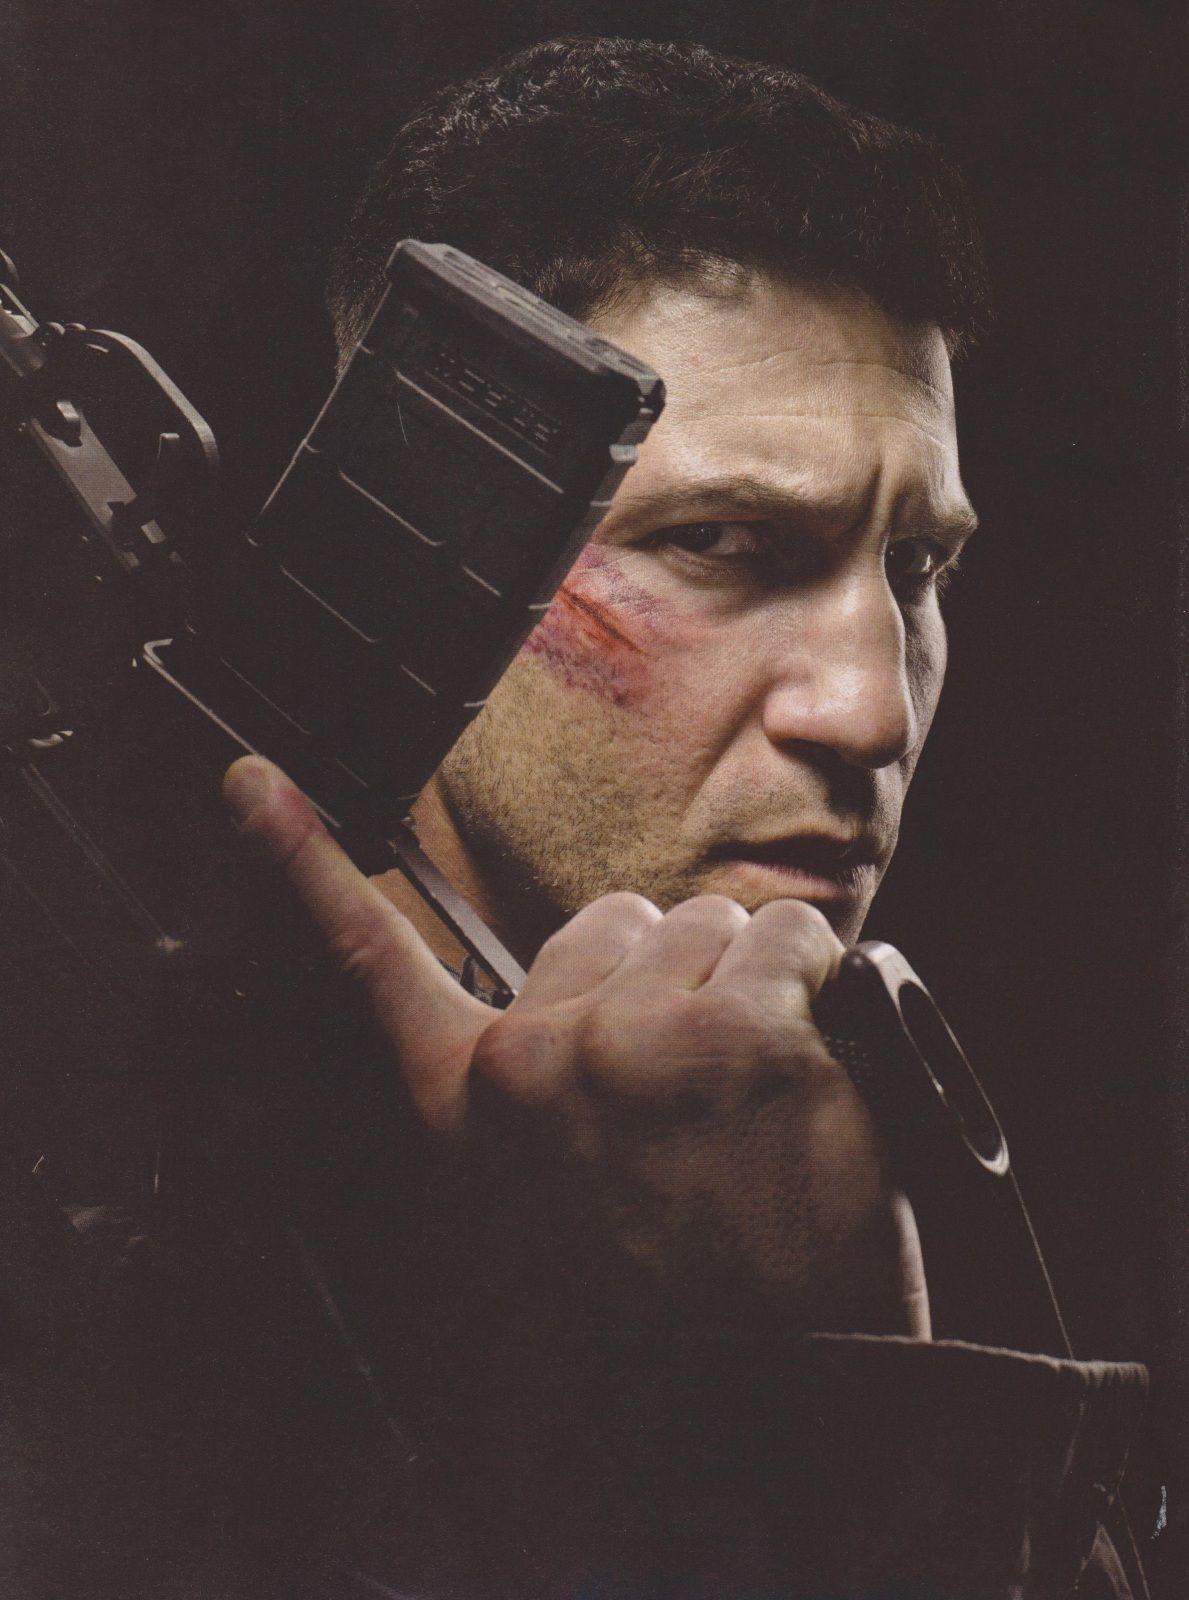 New Photo of The Punisher and Scene Description From DAREDEVIL